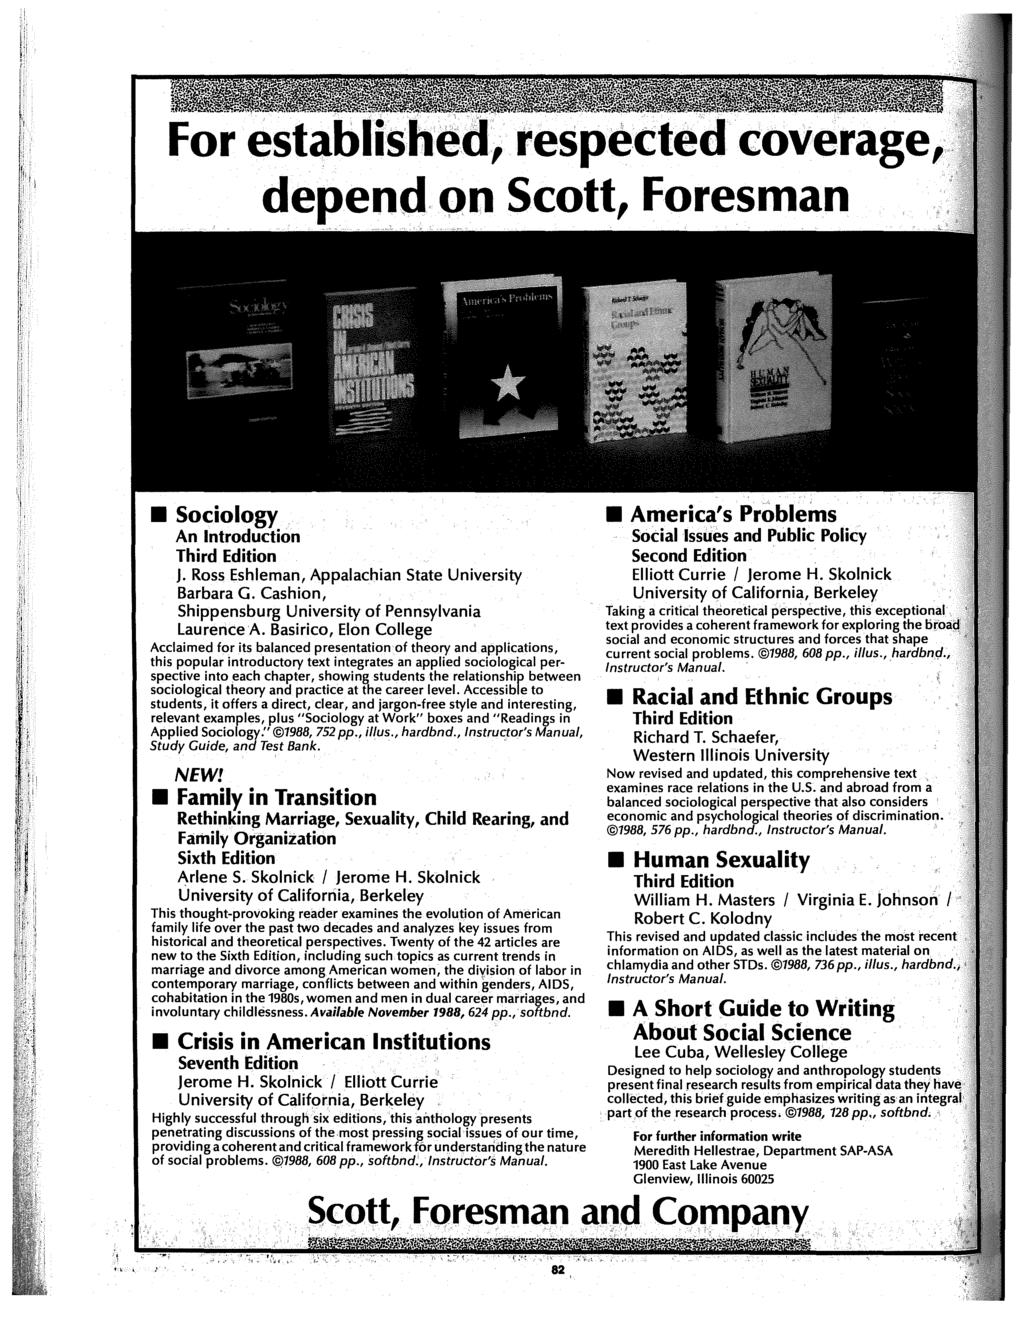 For established, respected coverage, depend, Qn Scott, Foresman Sociology An Introduction Third Edition J, Ross Eshleman, Appalachian State University Barbara G.